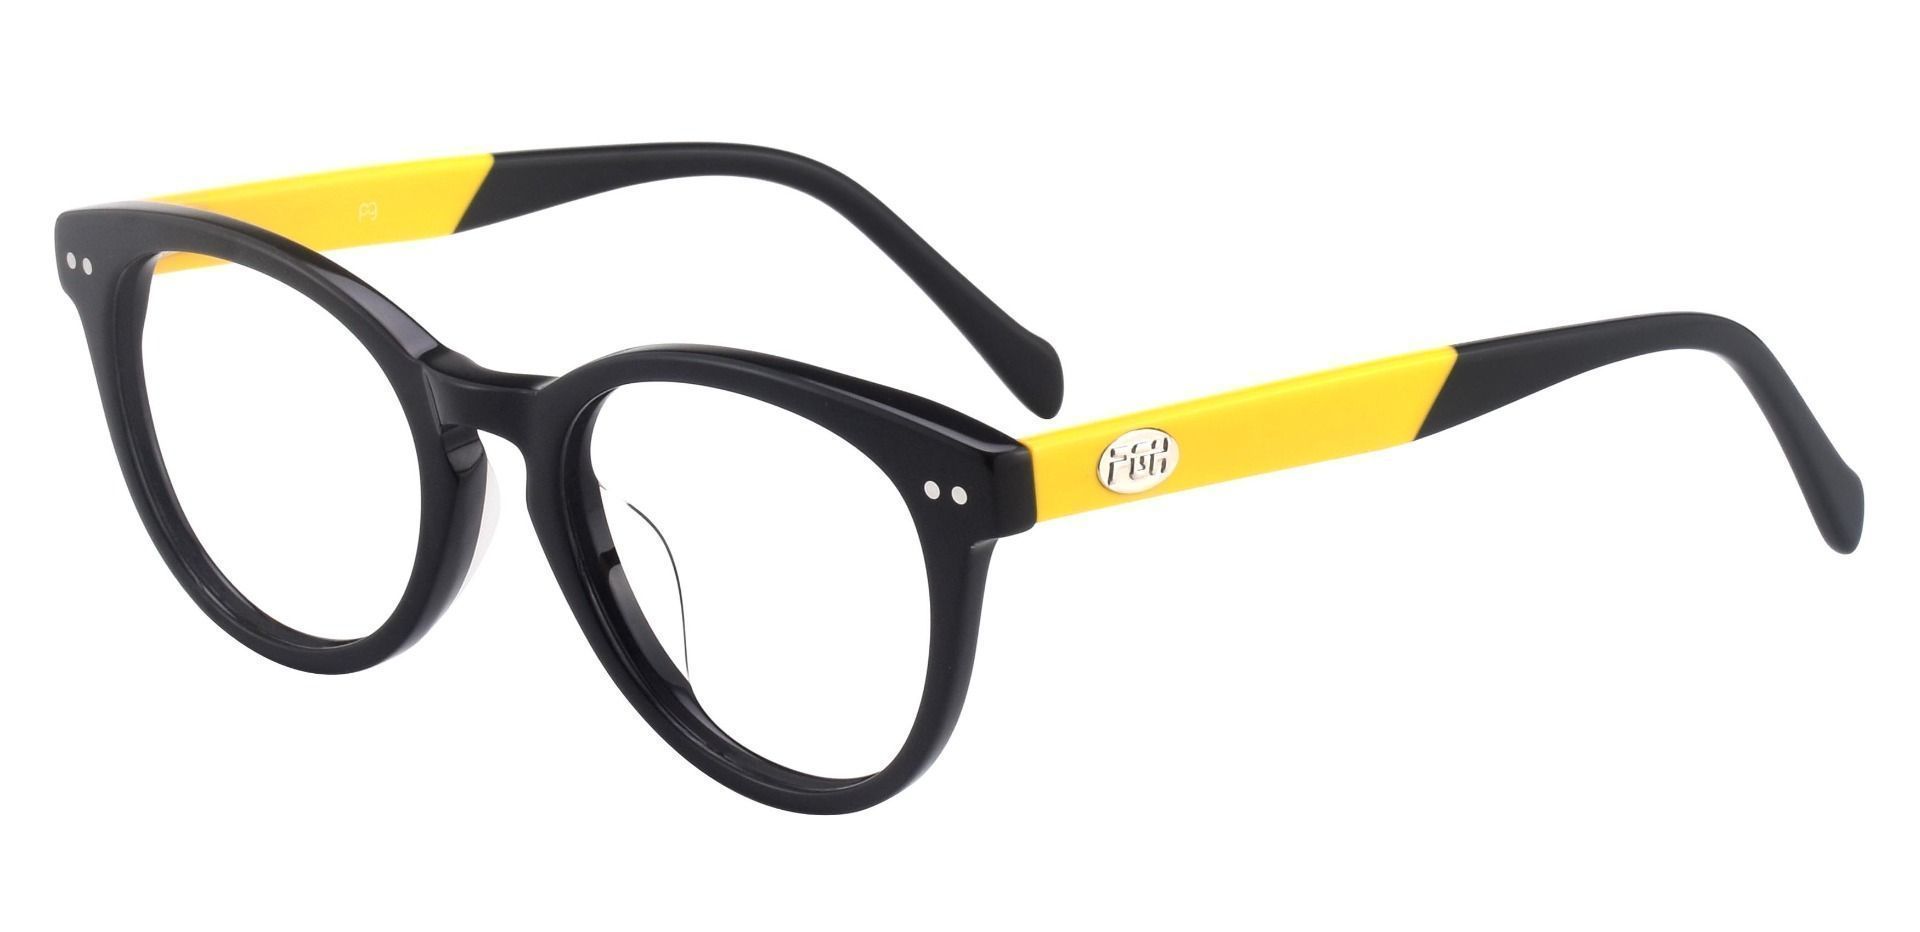 Forbes Oval Non-Rx Glasses - The Frame Is Black And Gold